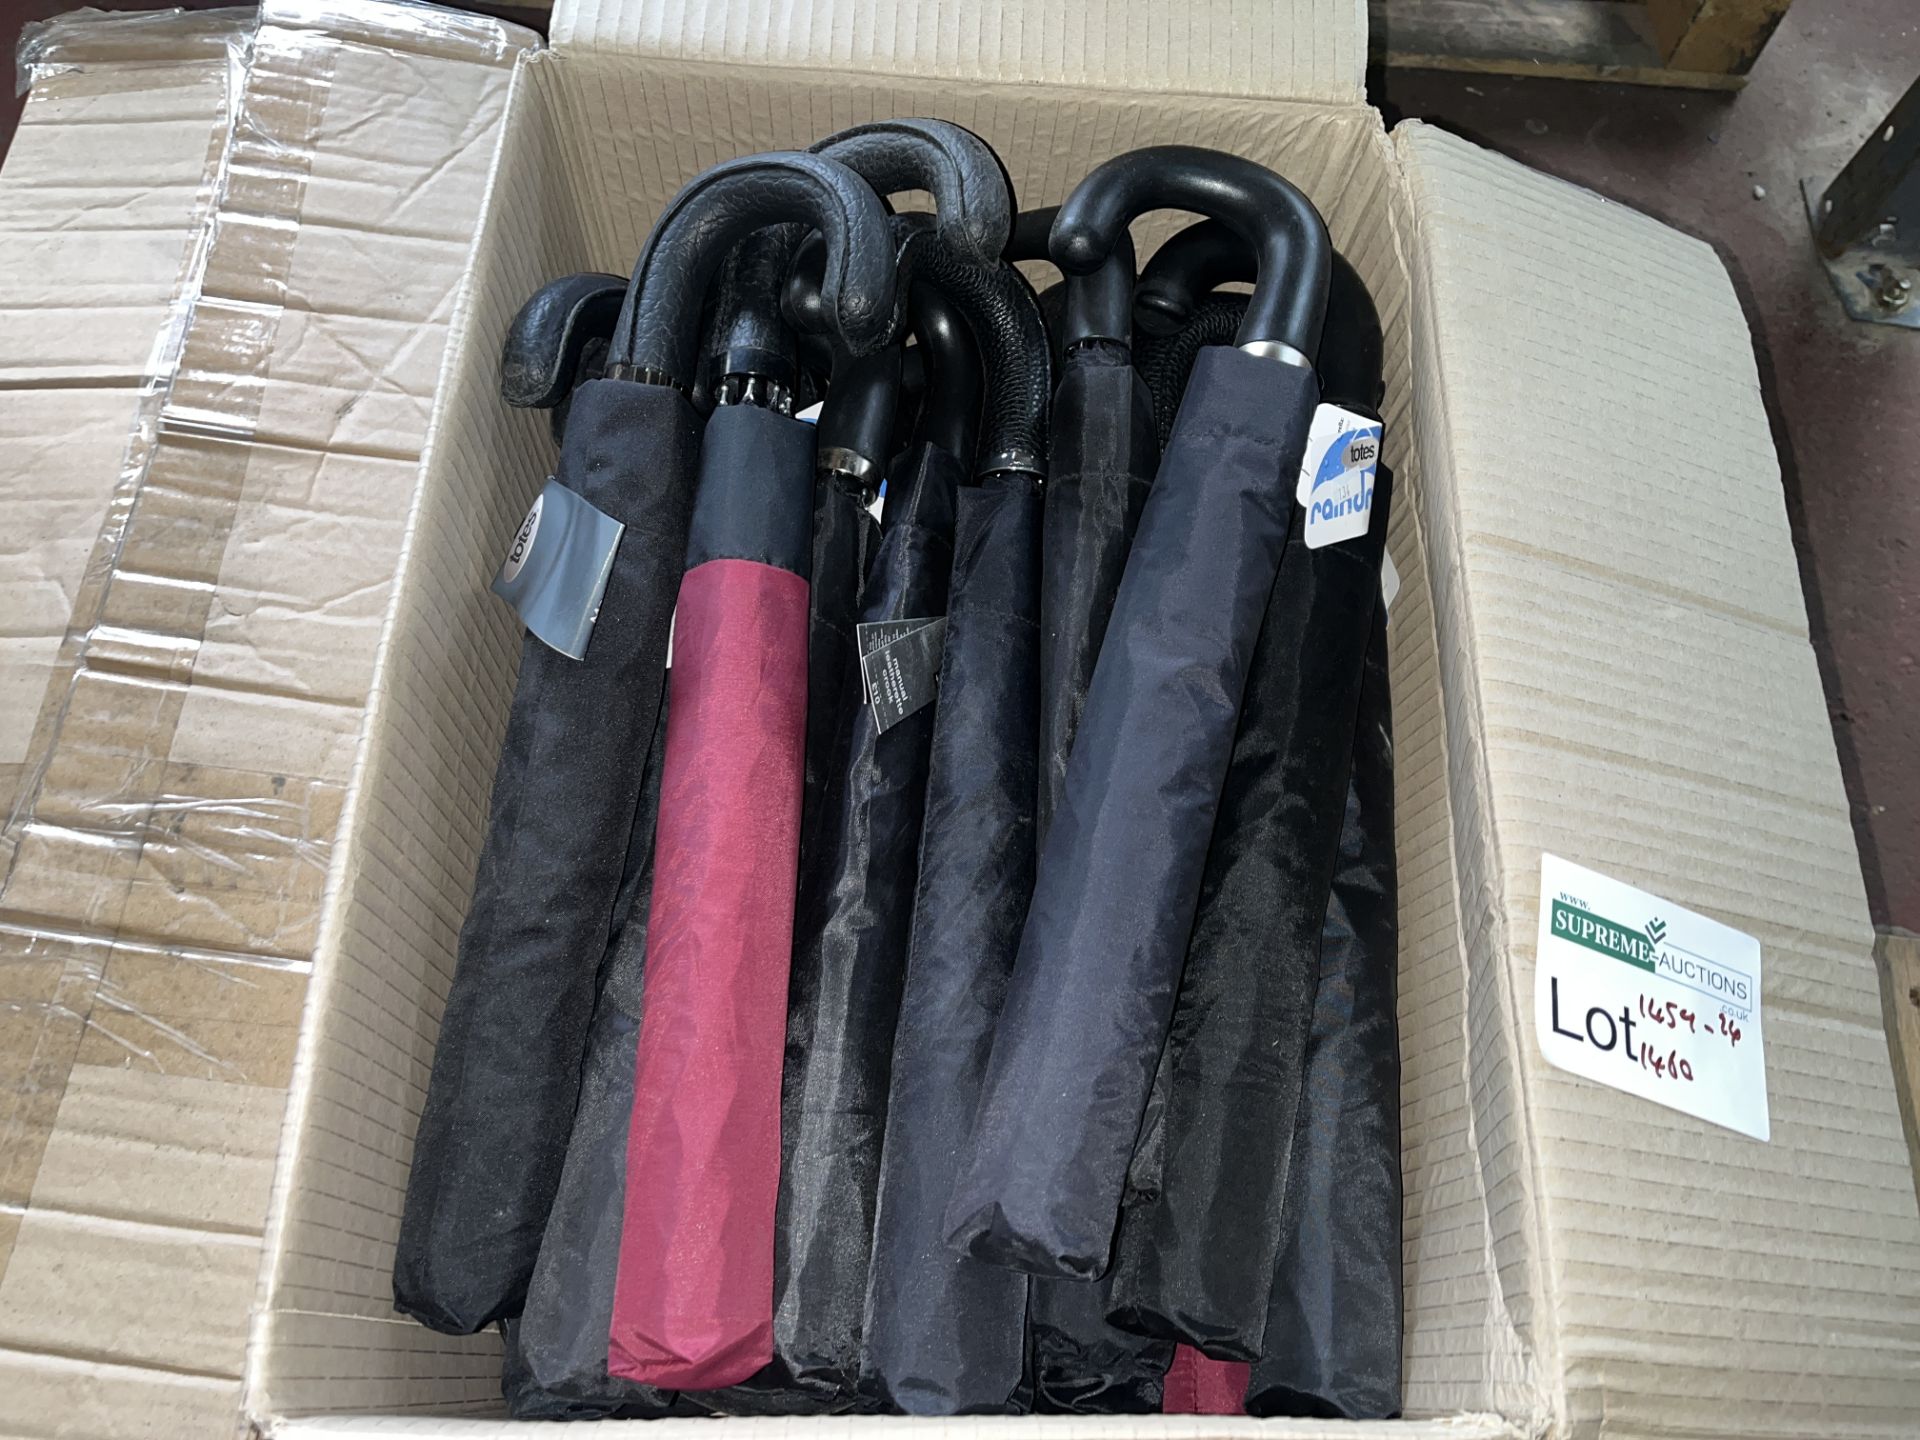 15 X BRAND NEW ASSORTED TOTES UMBRELLAS IN VARIOUS STYLES AND SIZES R15